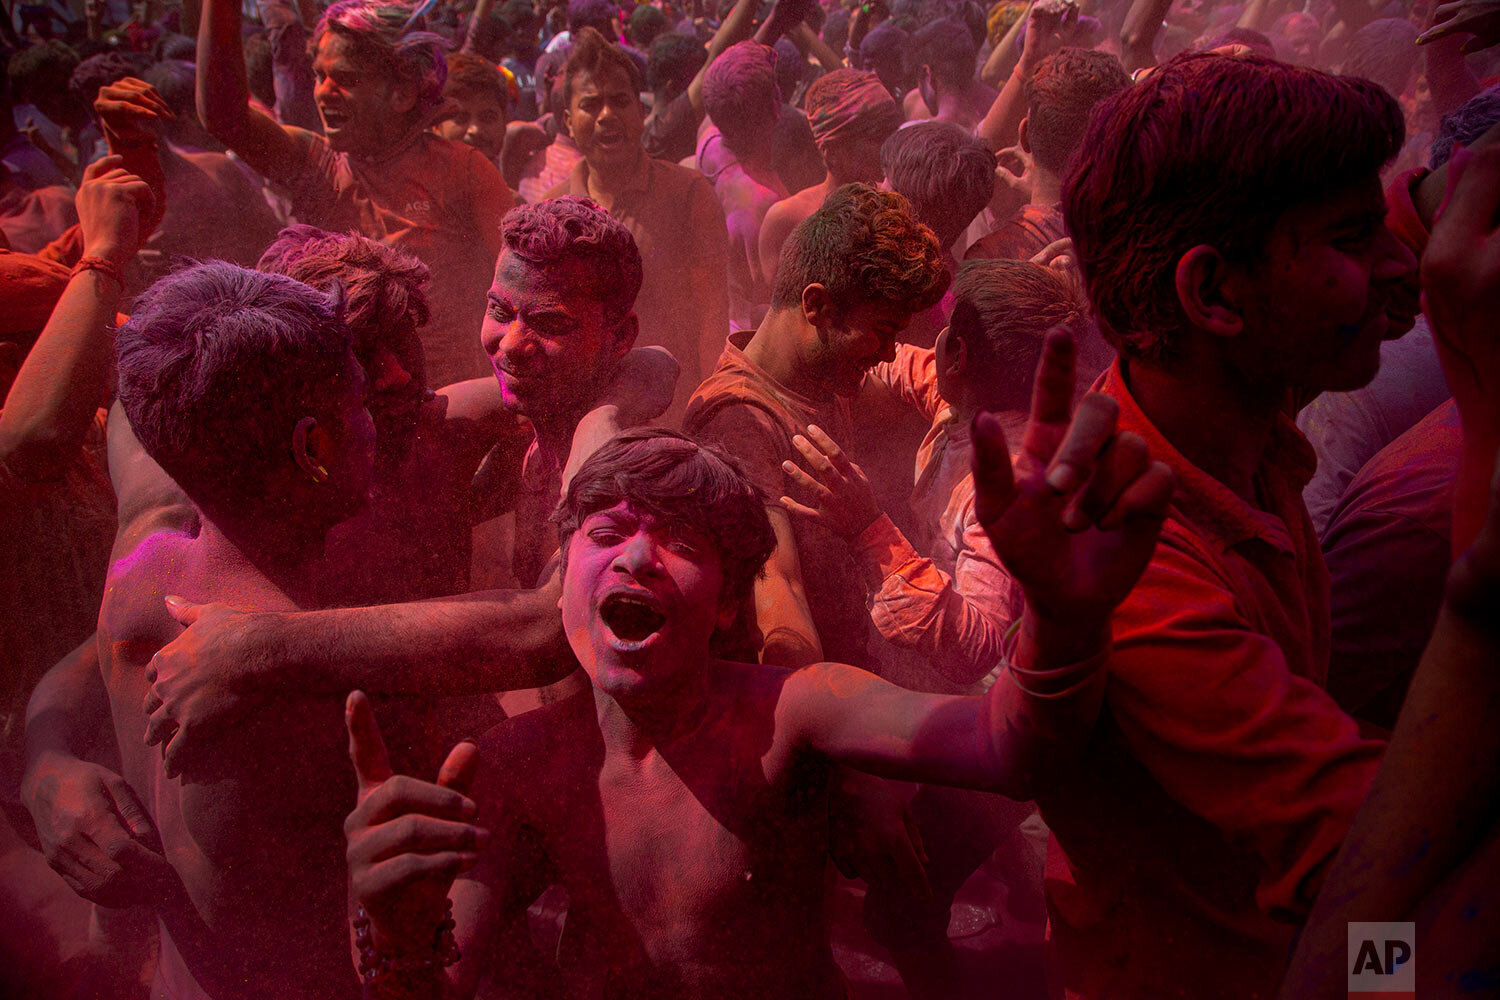  Indians dance and throw colored powder during Holi festival celebrations in Gauhati, India, Tuesday, March 10, 2020. (AP Photo/Anupam Nath) 